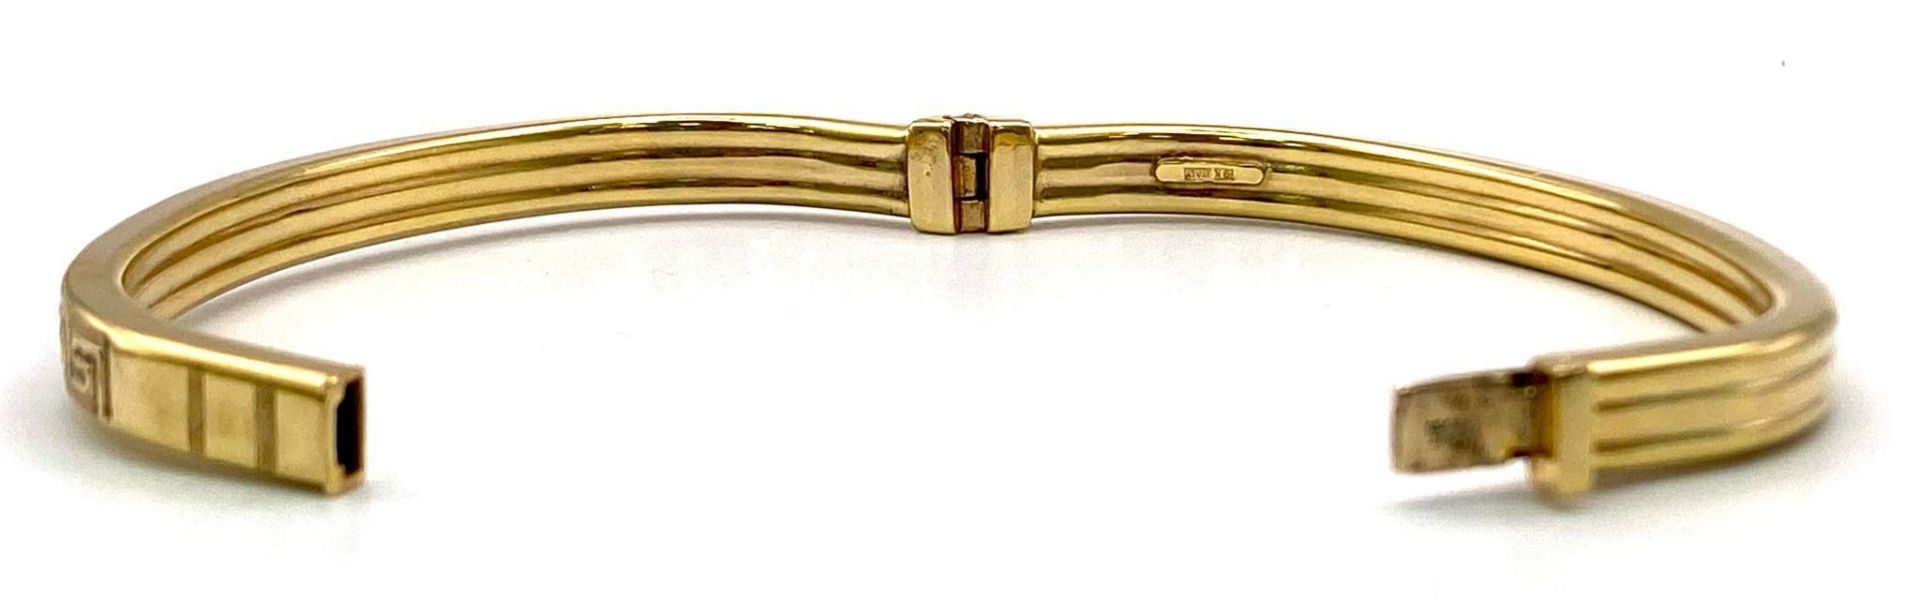 A 9K GOLD ITALIAN DESIGNER HINGED BANGLE WITH GREEK PATTERN ON ONE SIDE . 10.2gms - Image 3 of 5